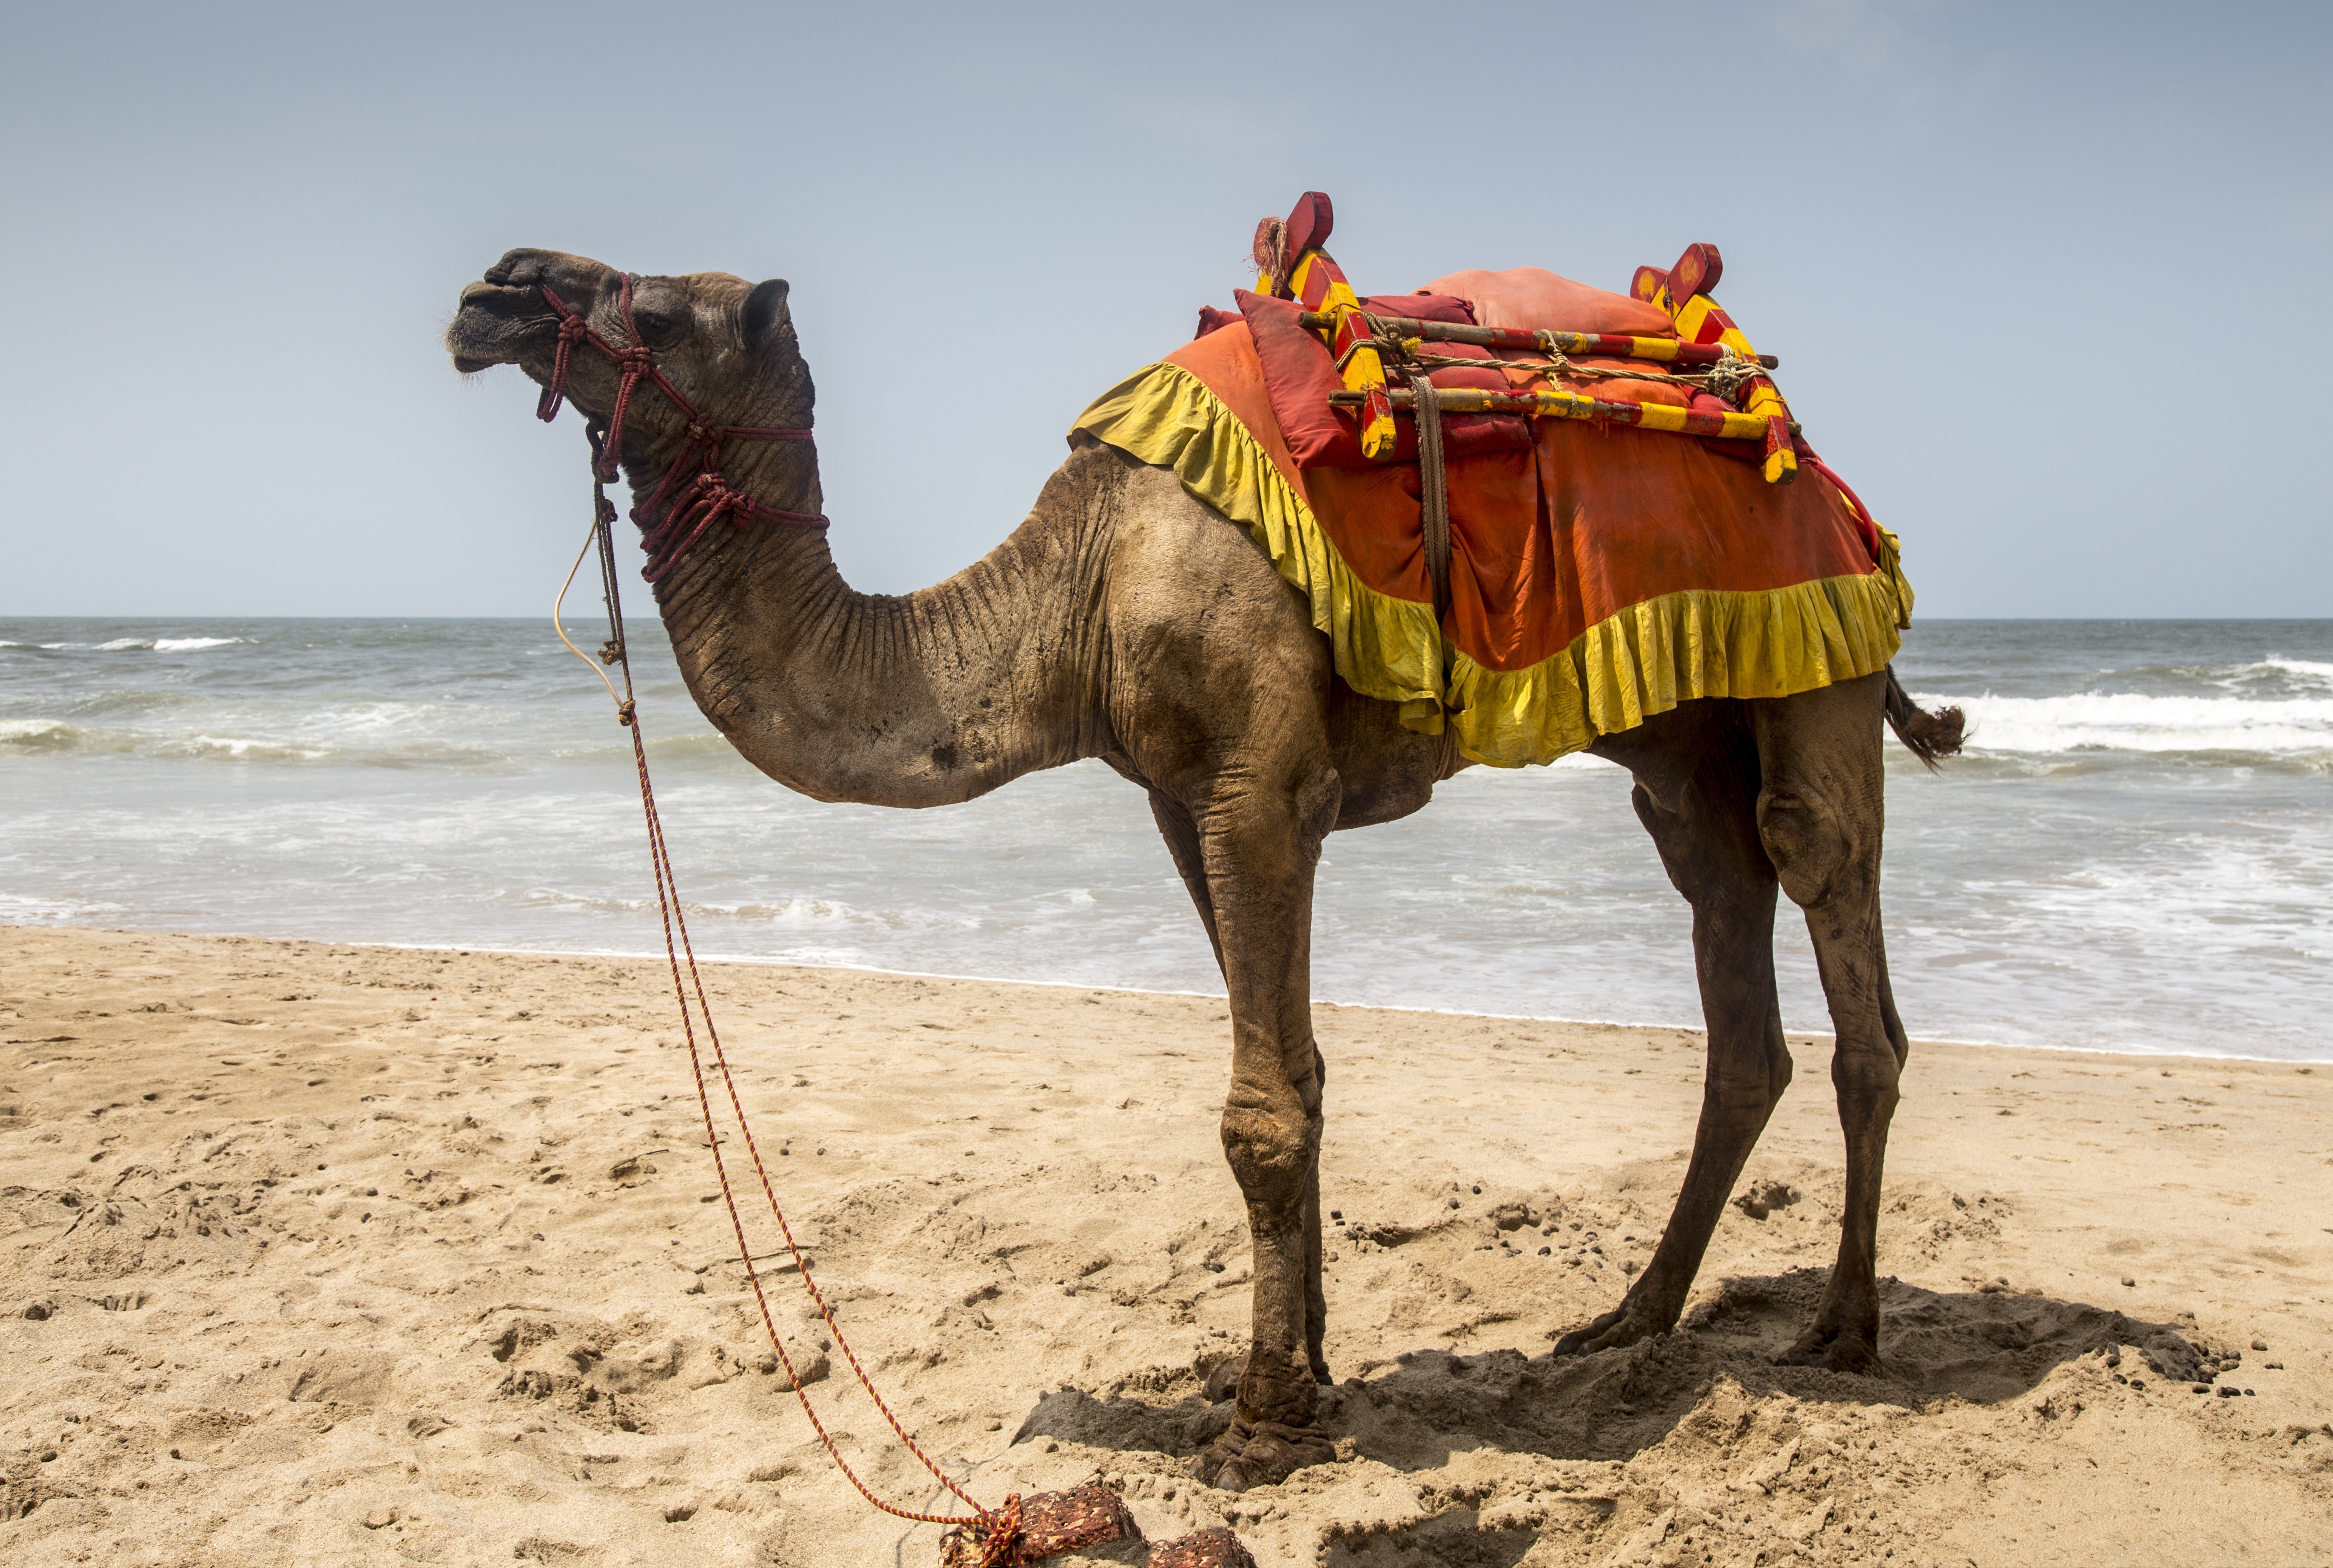 close capture of a camel at the seashore during day time